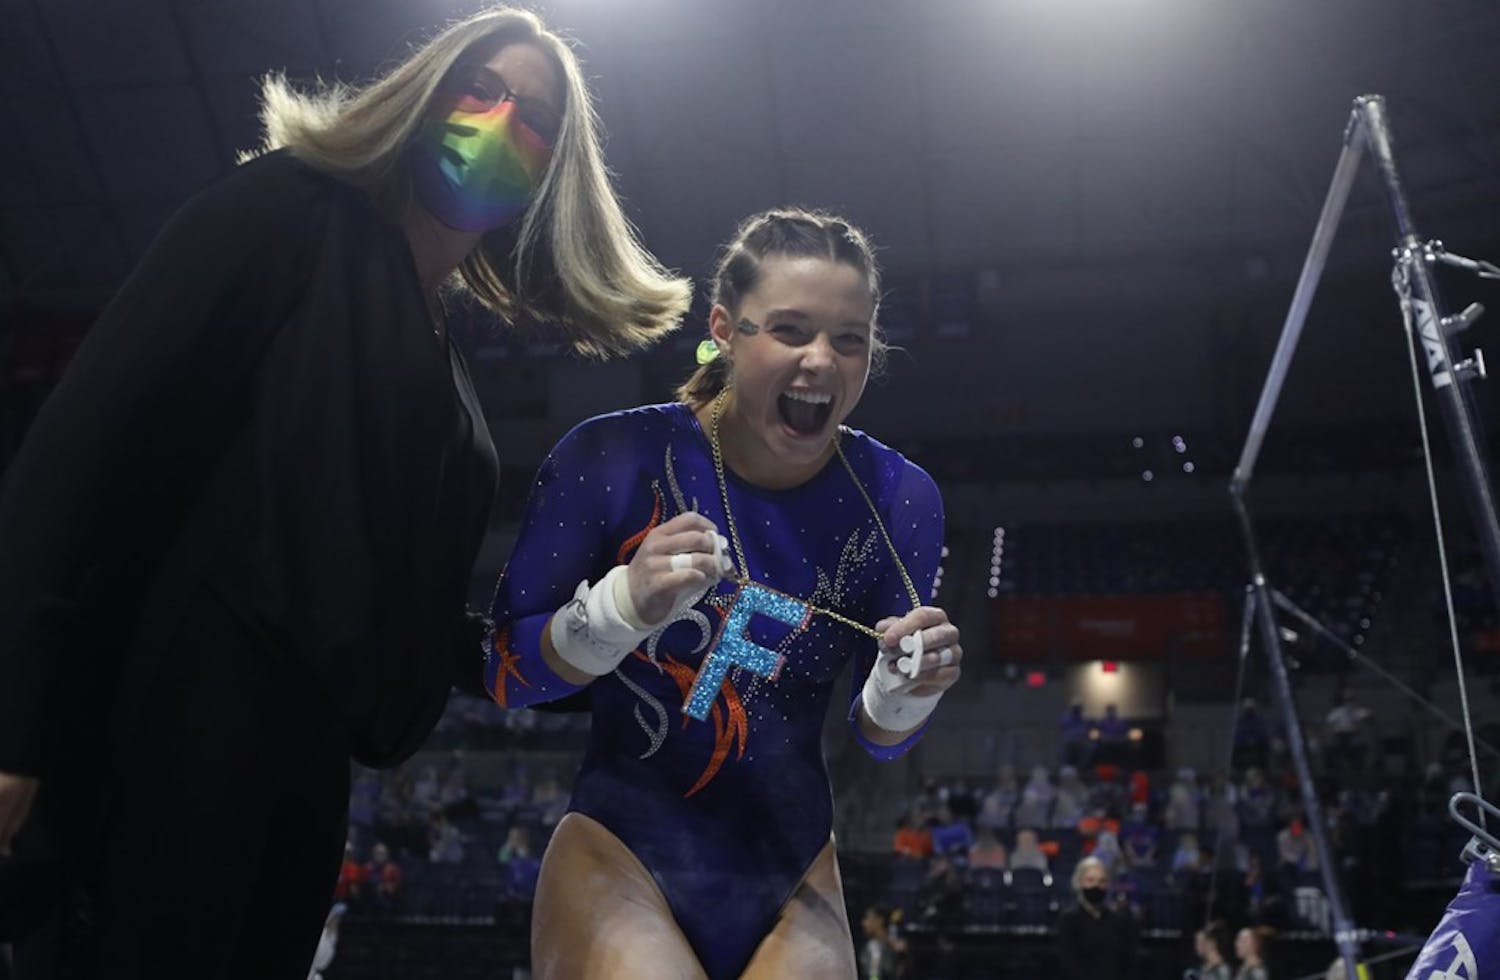 Senior Megan Skaggs was the first Florida gymnast to sport the shiny pendant after she posted a career-high 9.95 on the uneven bars. Photo courtesy of Tiffany Franco.